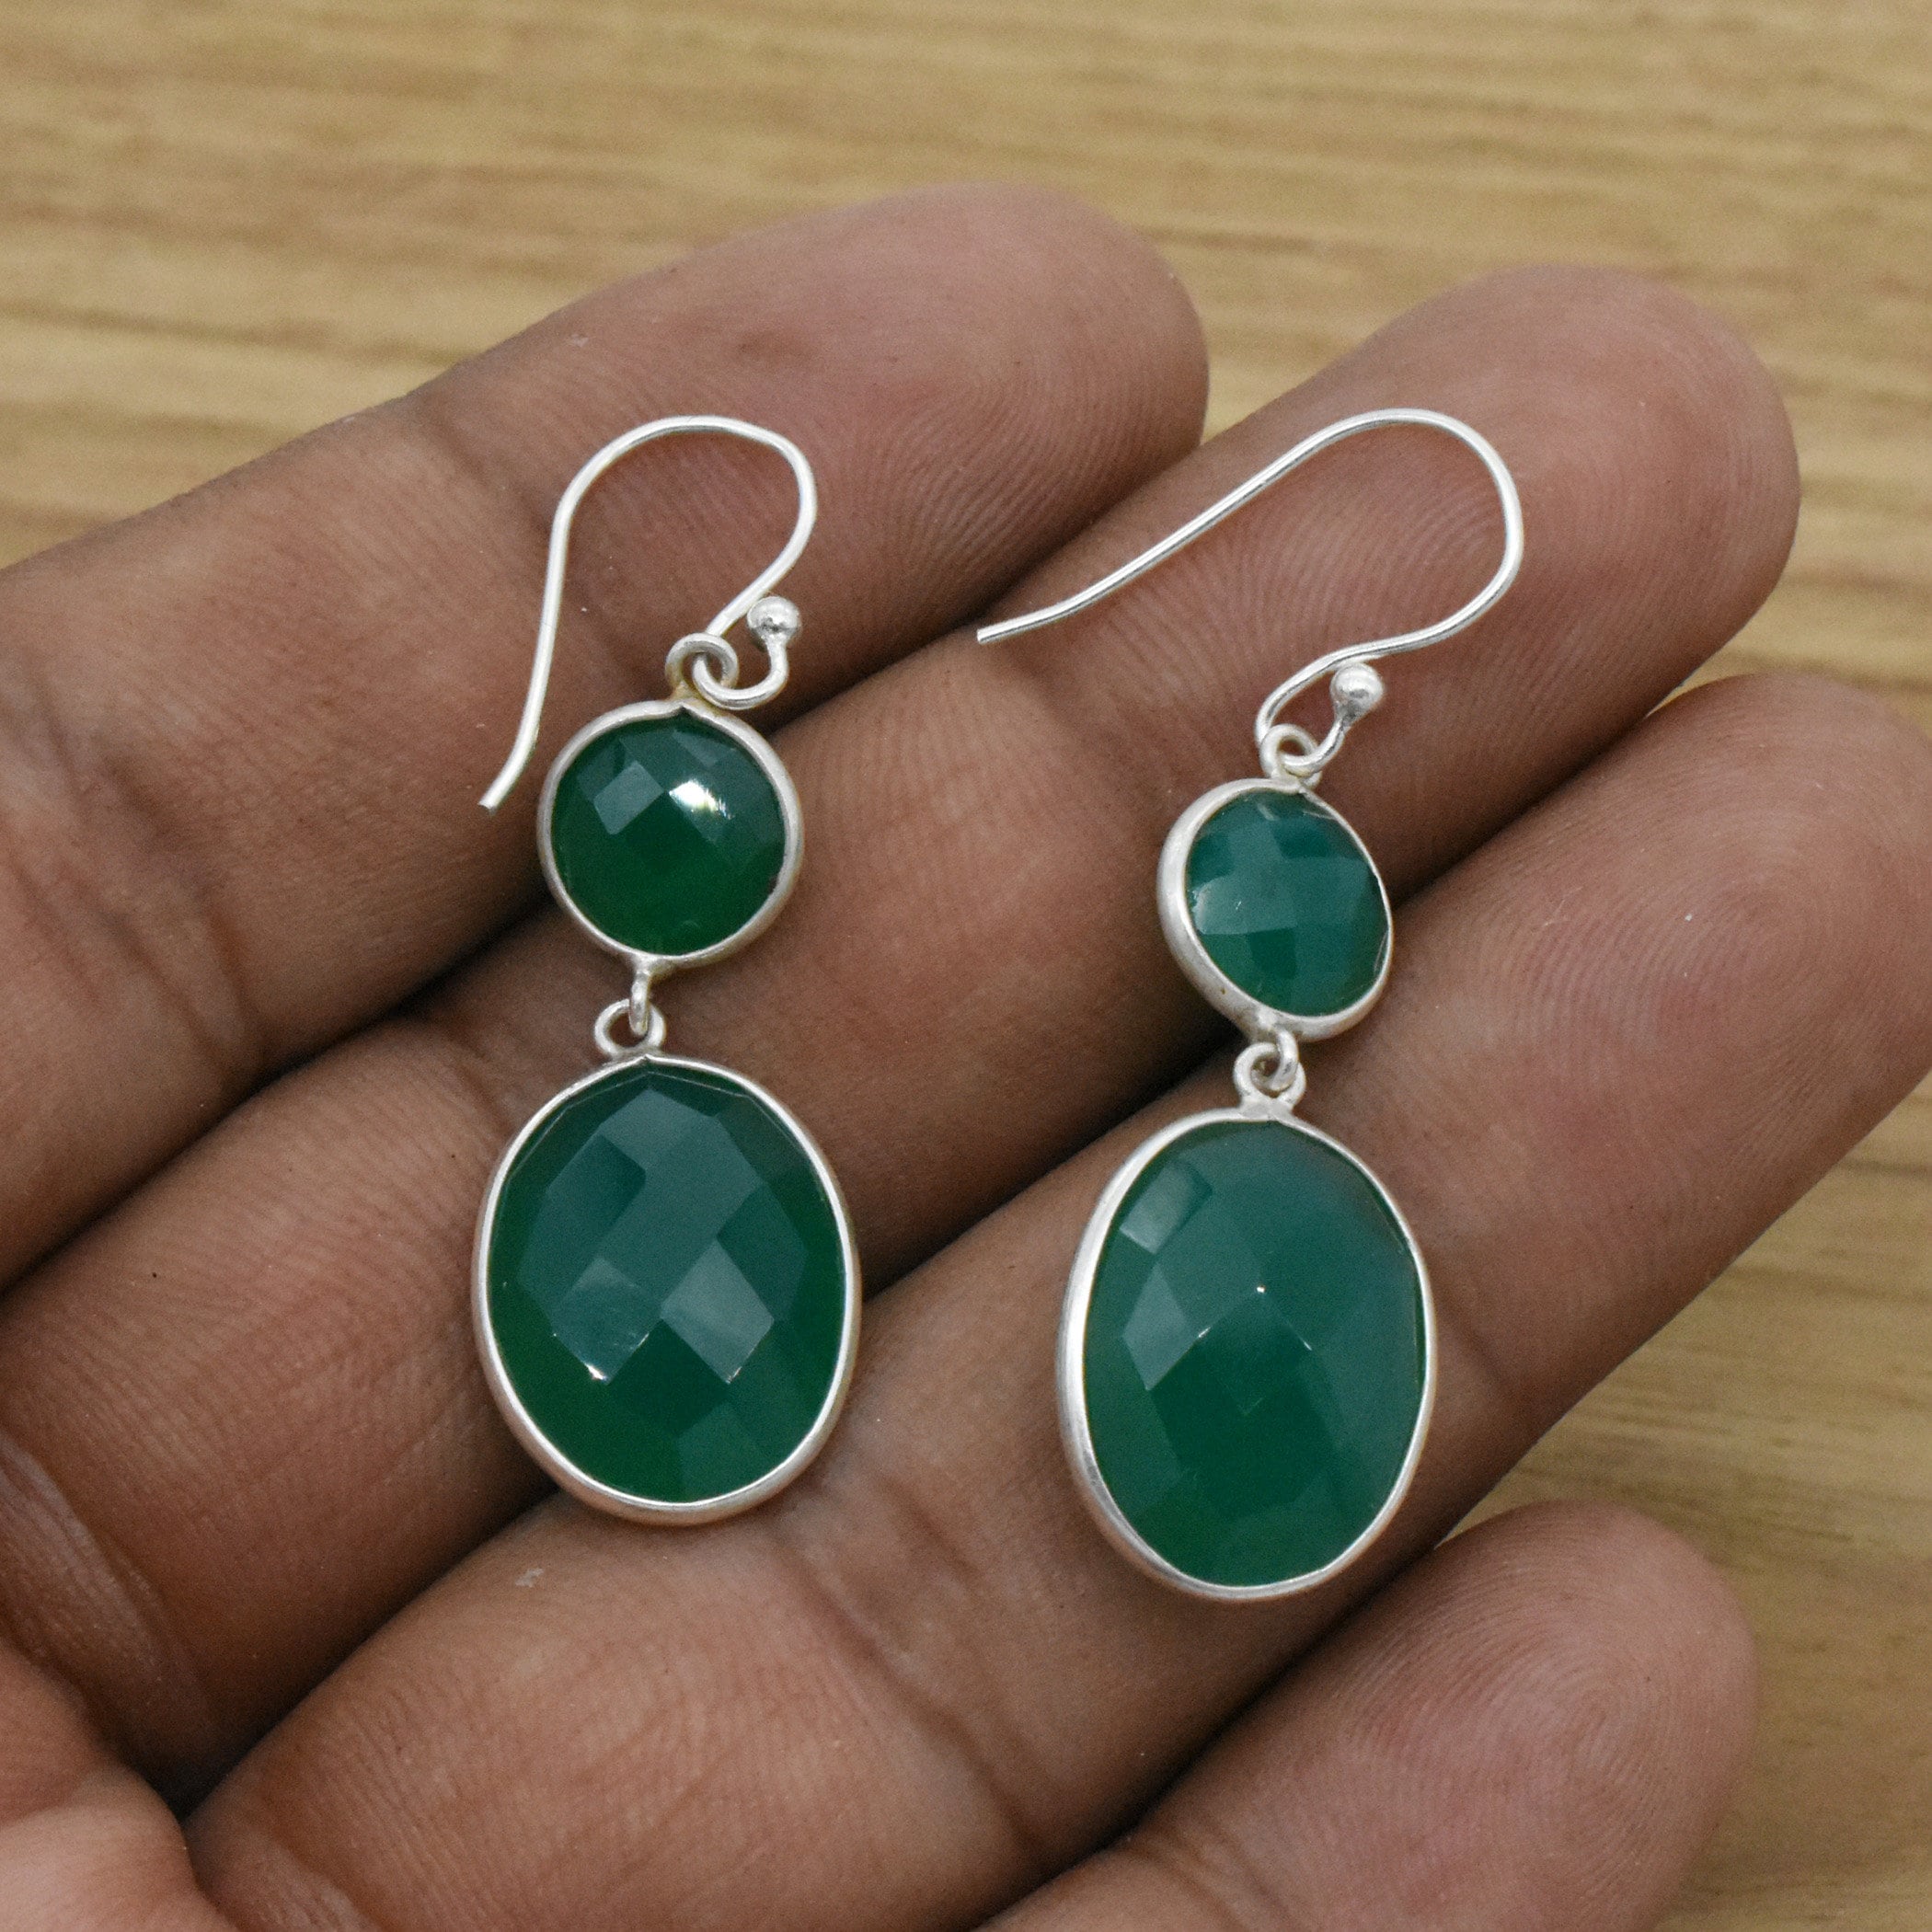 Details about   Handmade Women's 925 Sterling Silver Dangle Earrings Natural Green Onyx Stones 